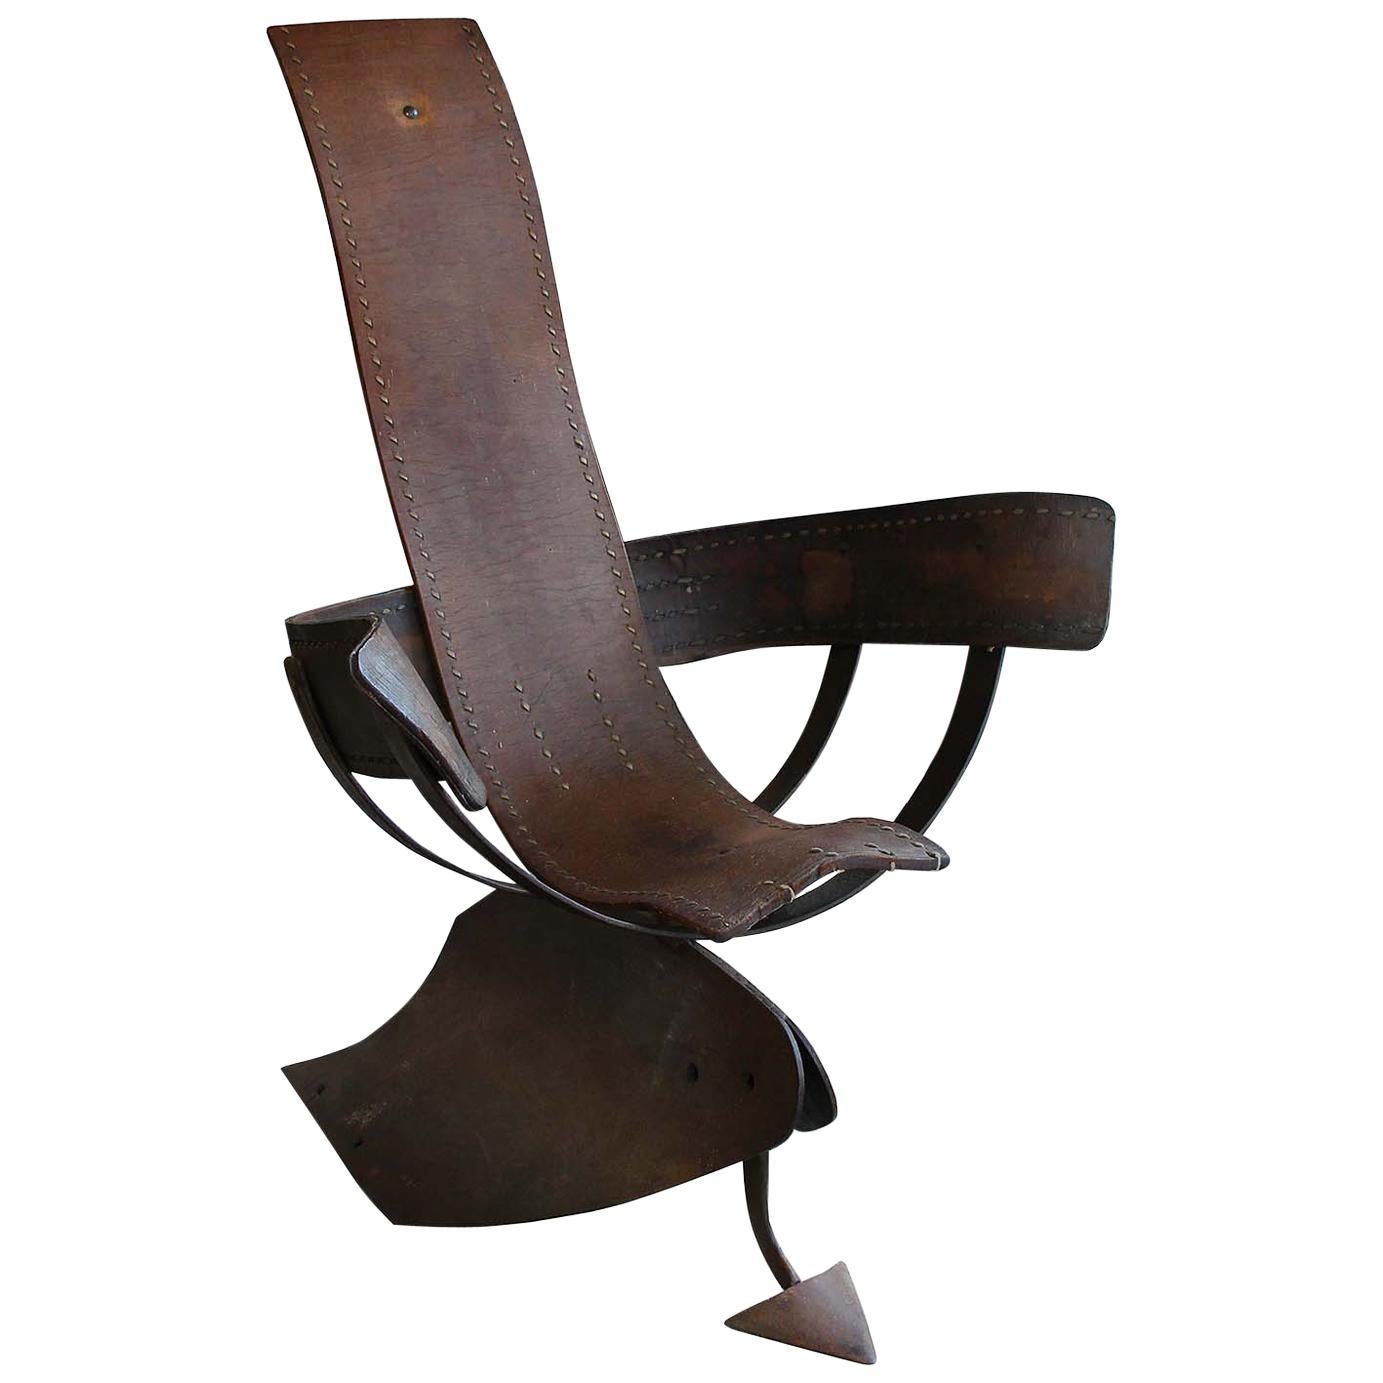 Unique Iron and Leather Art Armchair